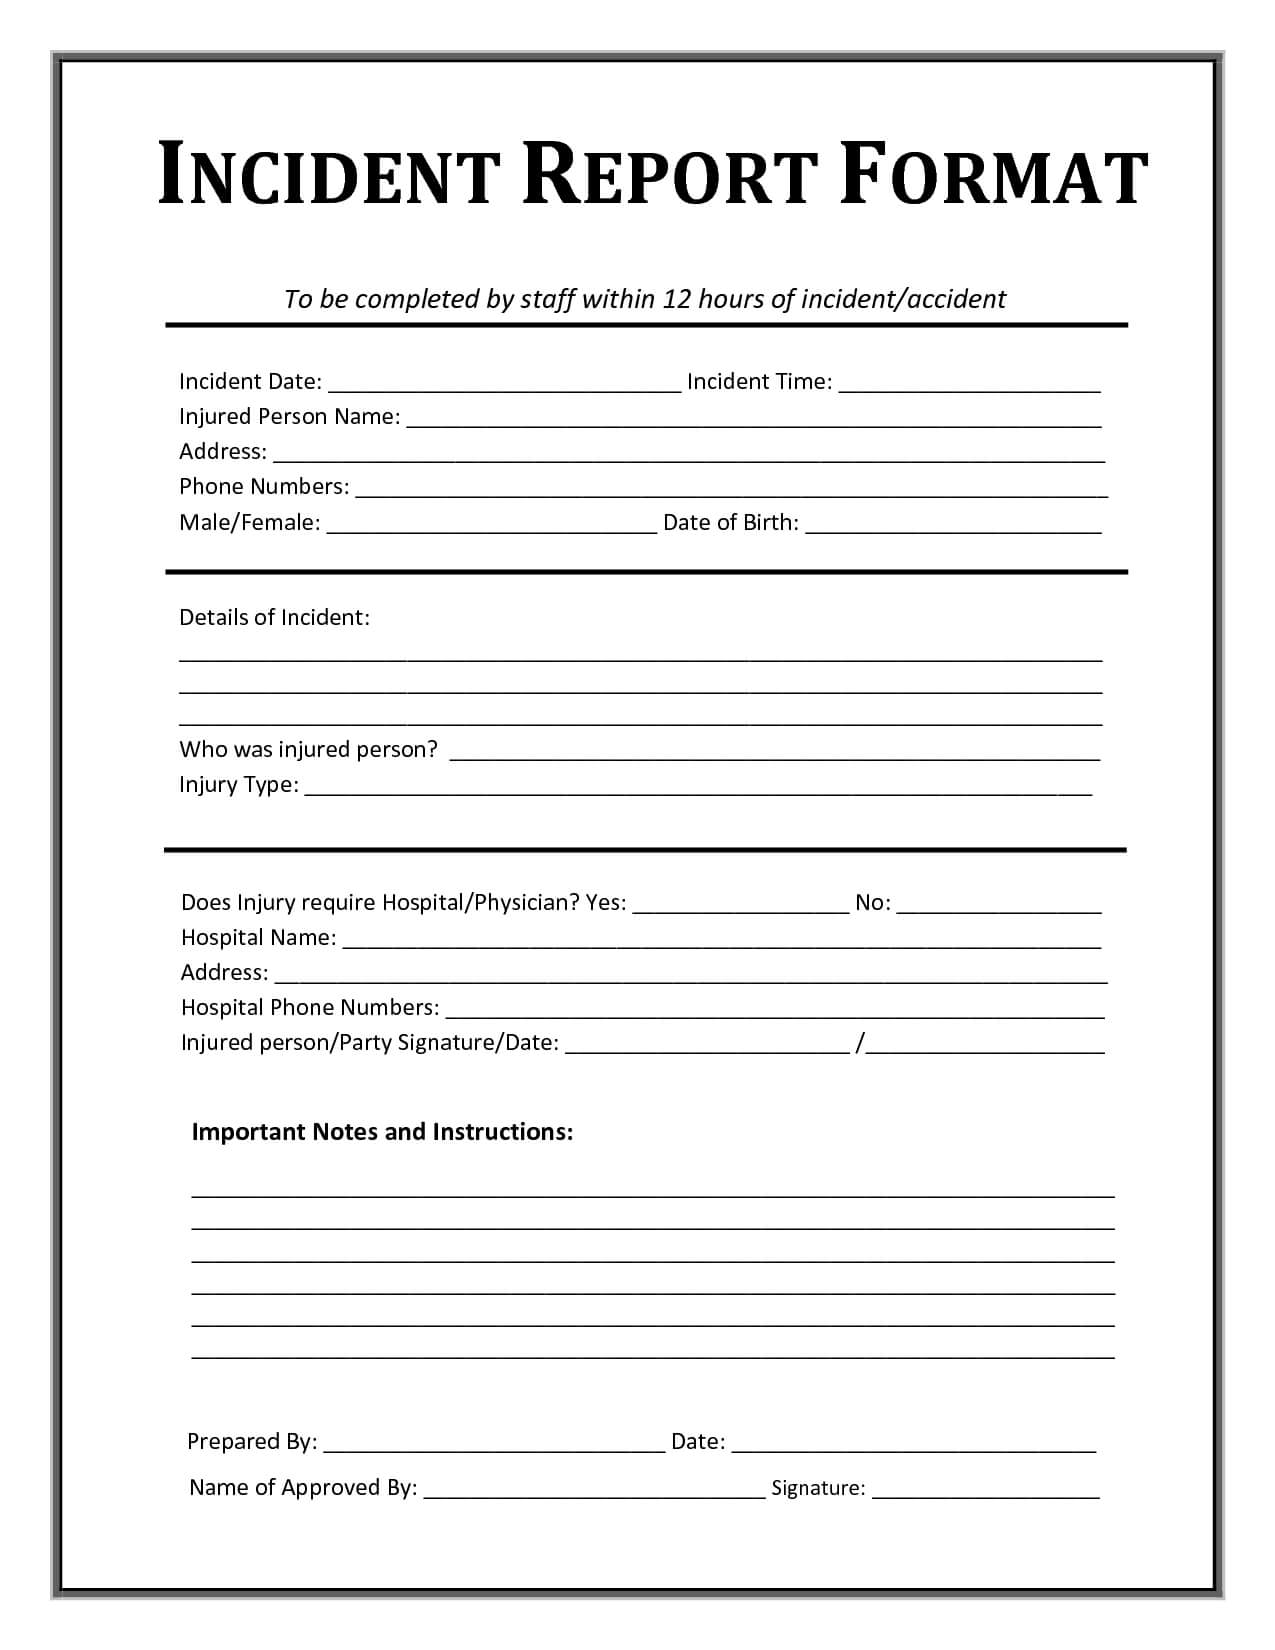 Incident Report Form Template Microsoft Excel | Report Regarding Incident Report Form Template Word